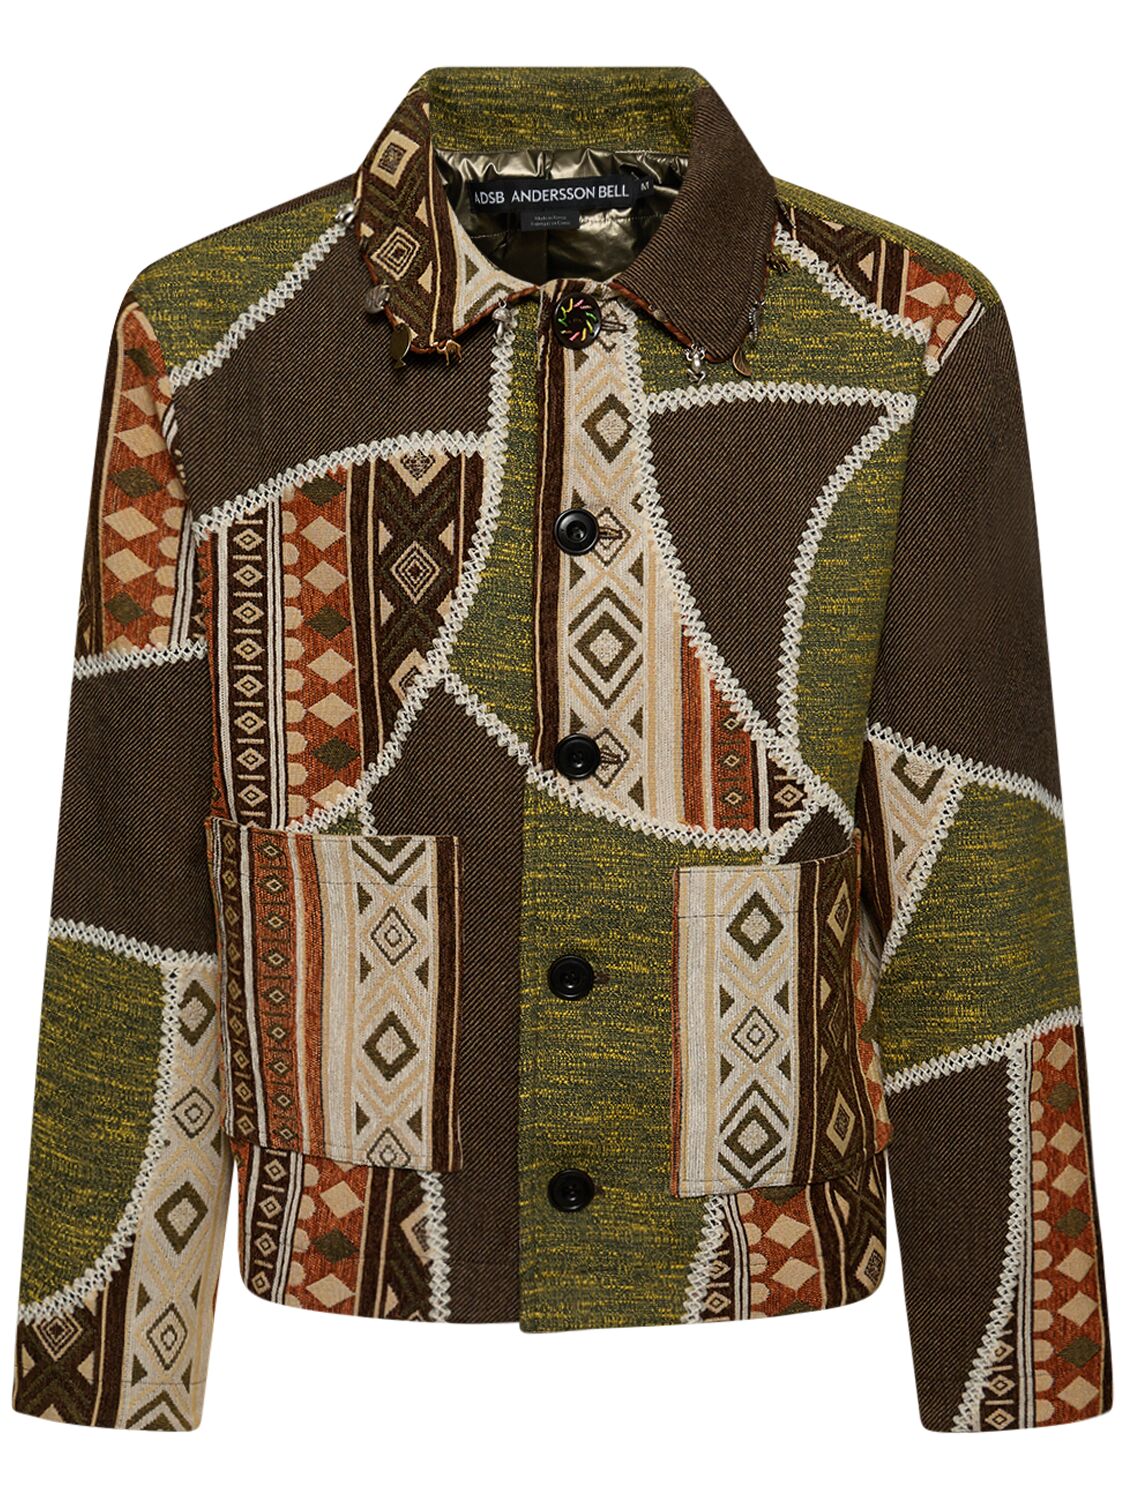 ANDERSSON BELL UNISEX JACQUARD PATCHWORK JACKET